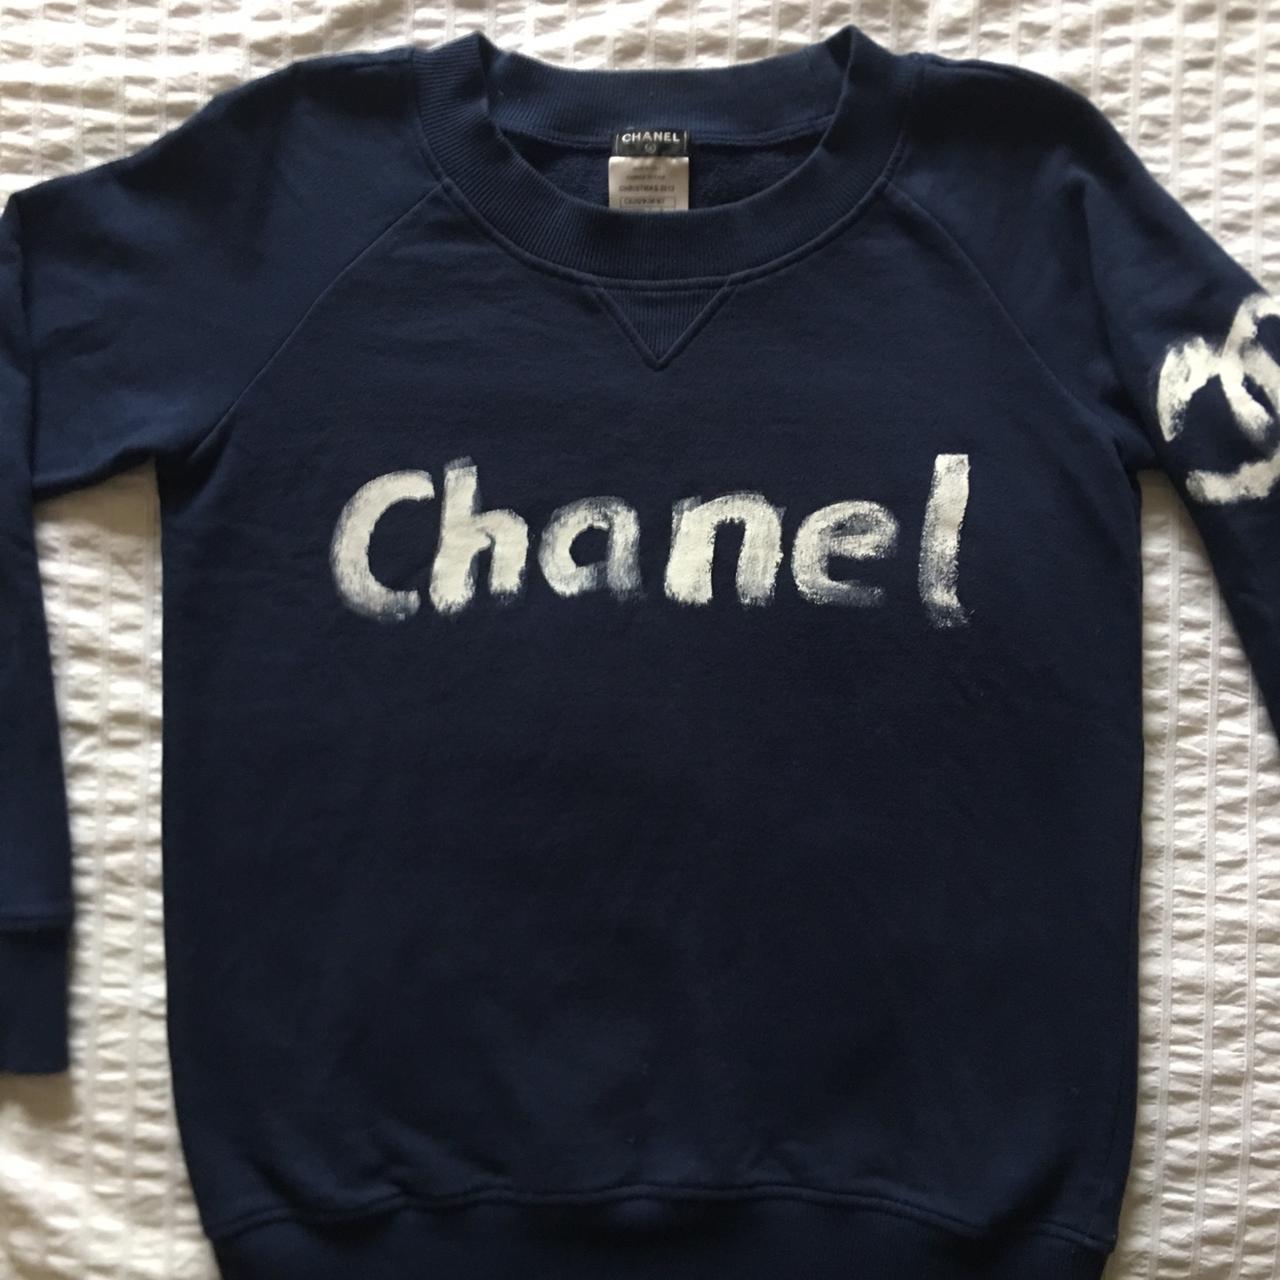 Limited edition VIP Chanel Jumper, hand pained by